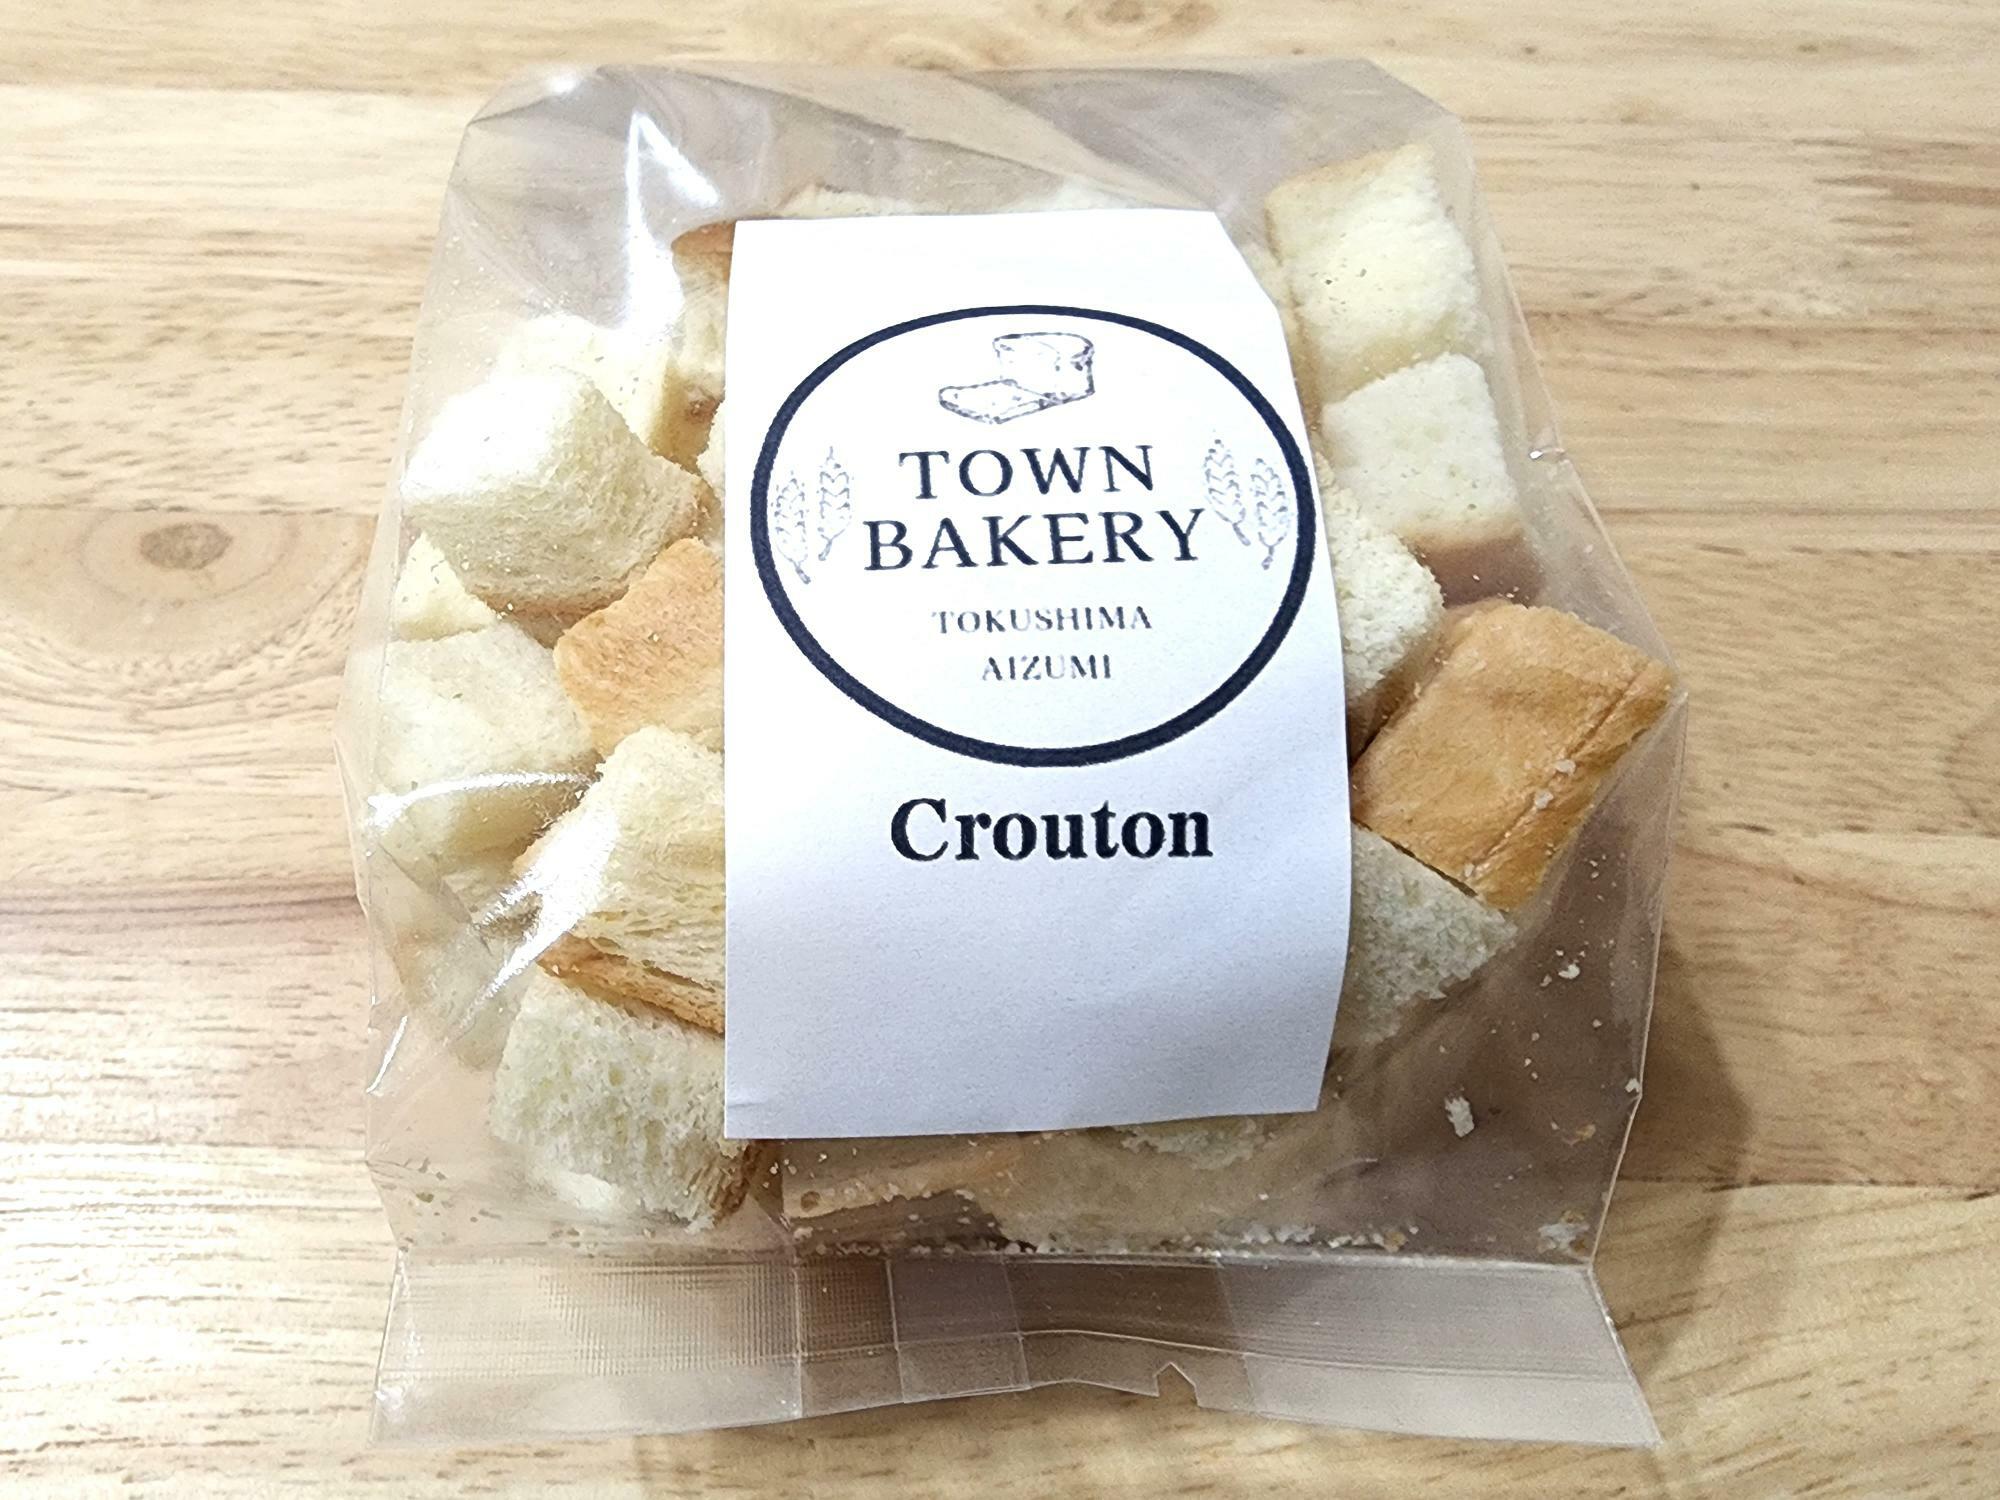 「TOWN BAKERY 徳島店」Crouton（クルトン）。